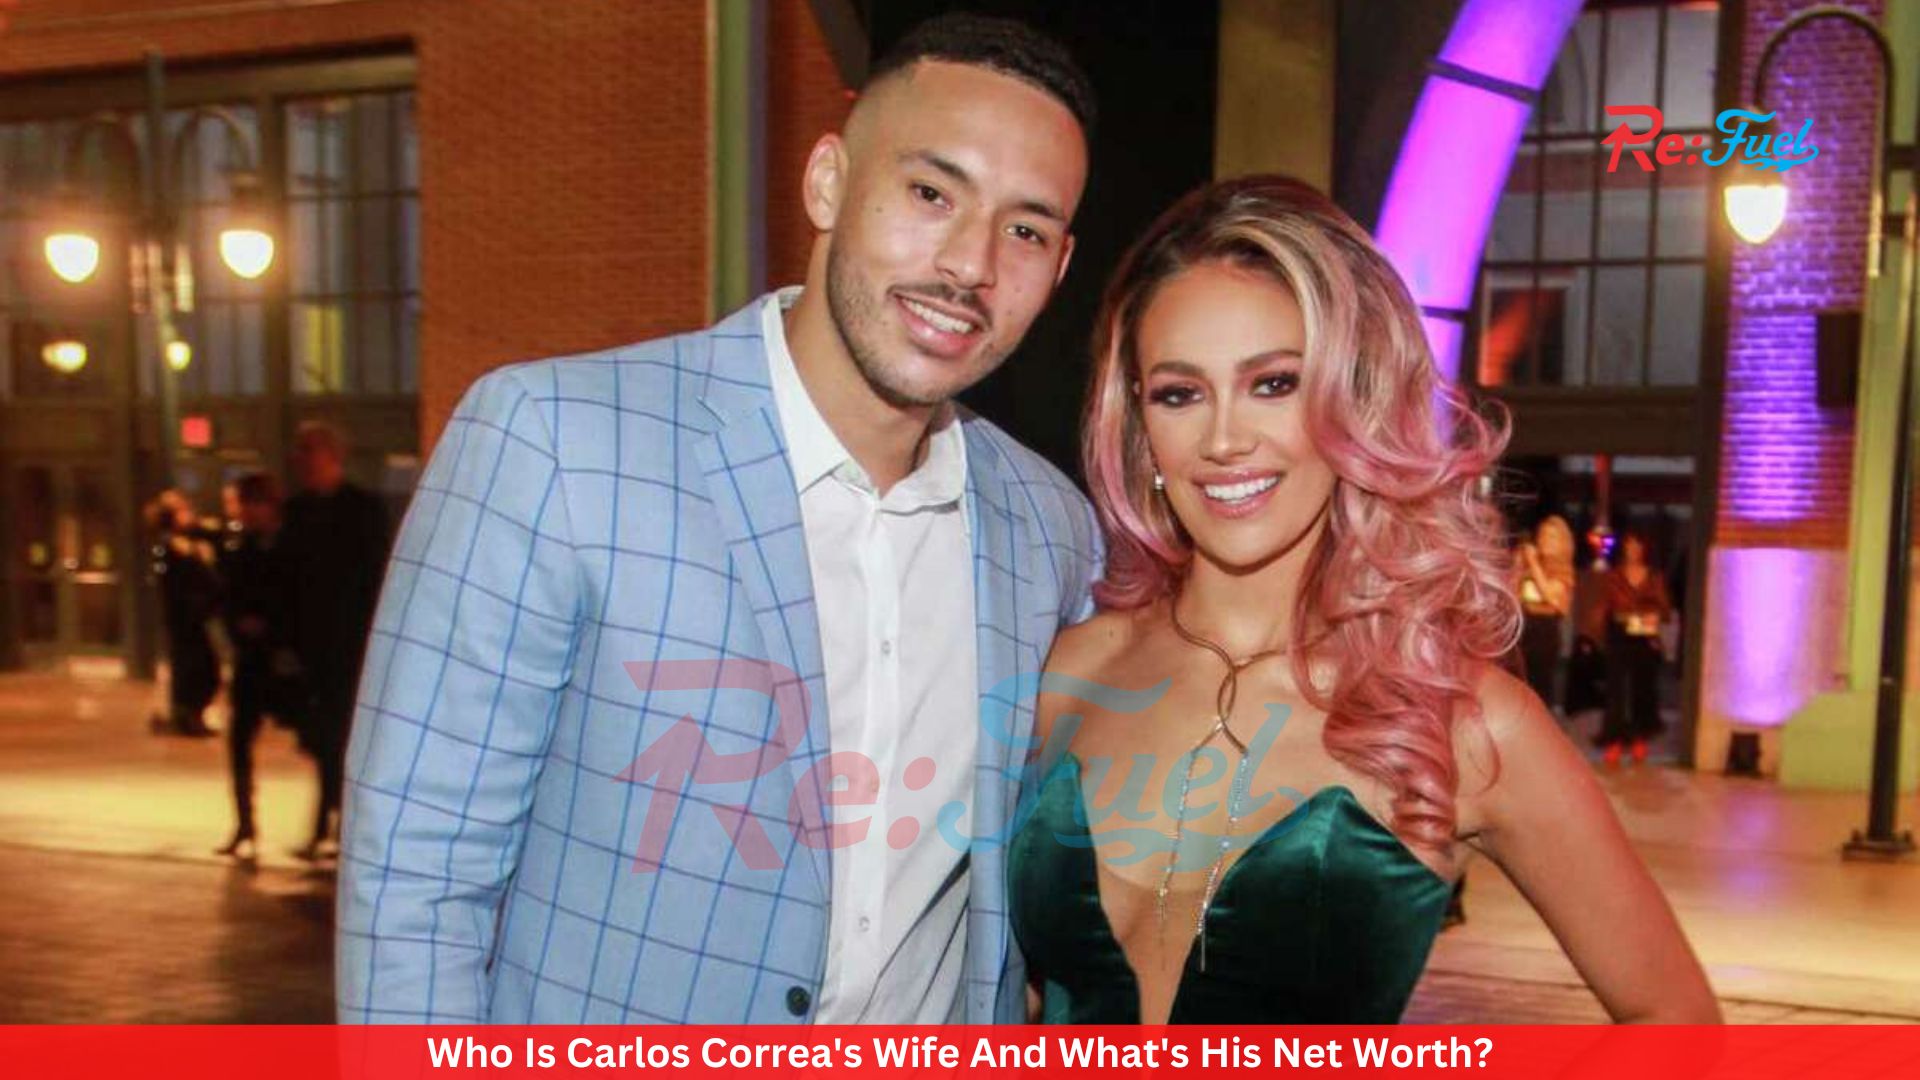 Who Is Carlos Correa's Wife And What's His Net Worth?